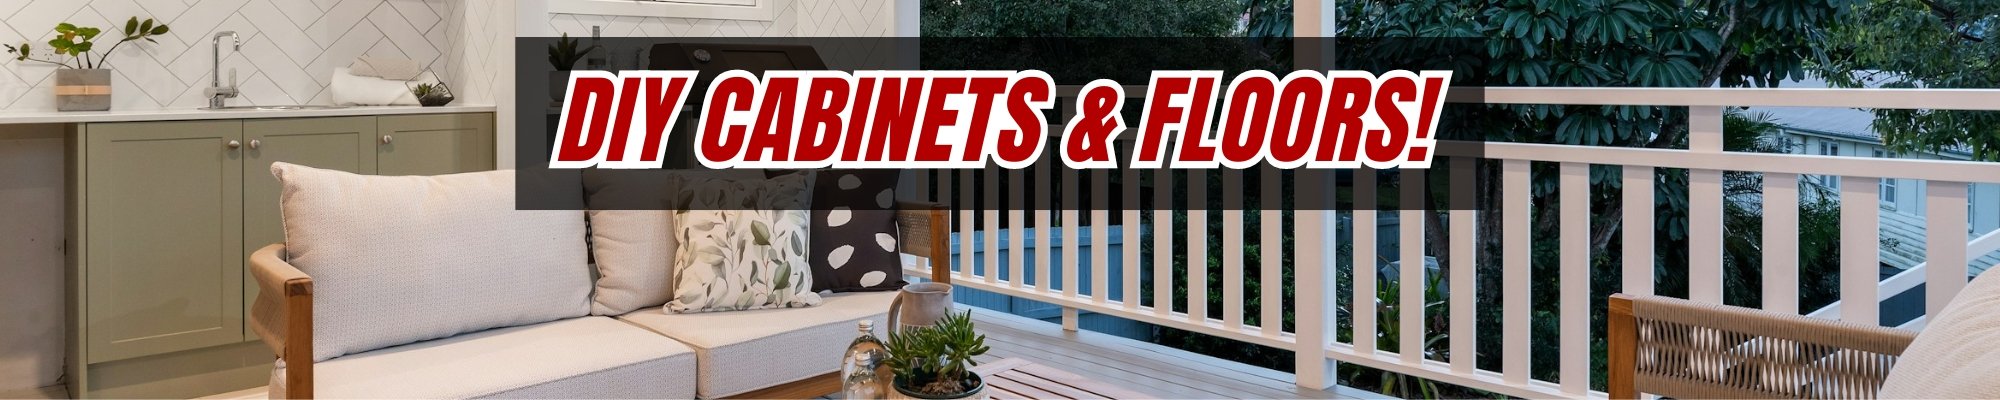 DIY Cabinets and Flooring in Lutz, FL